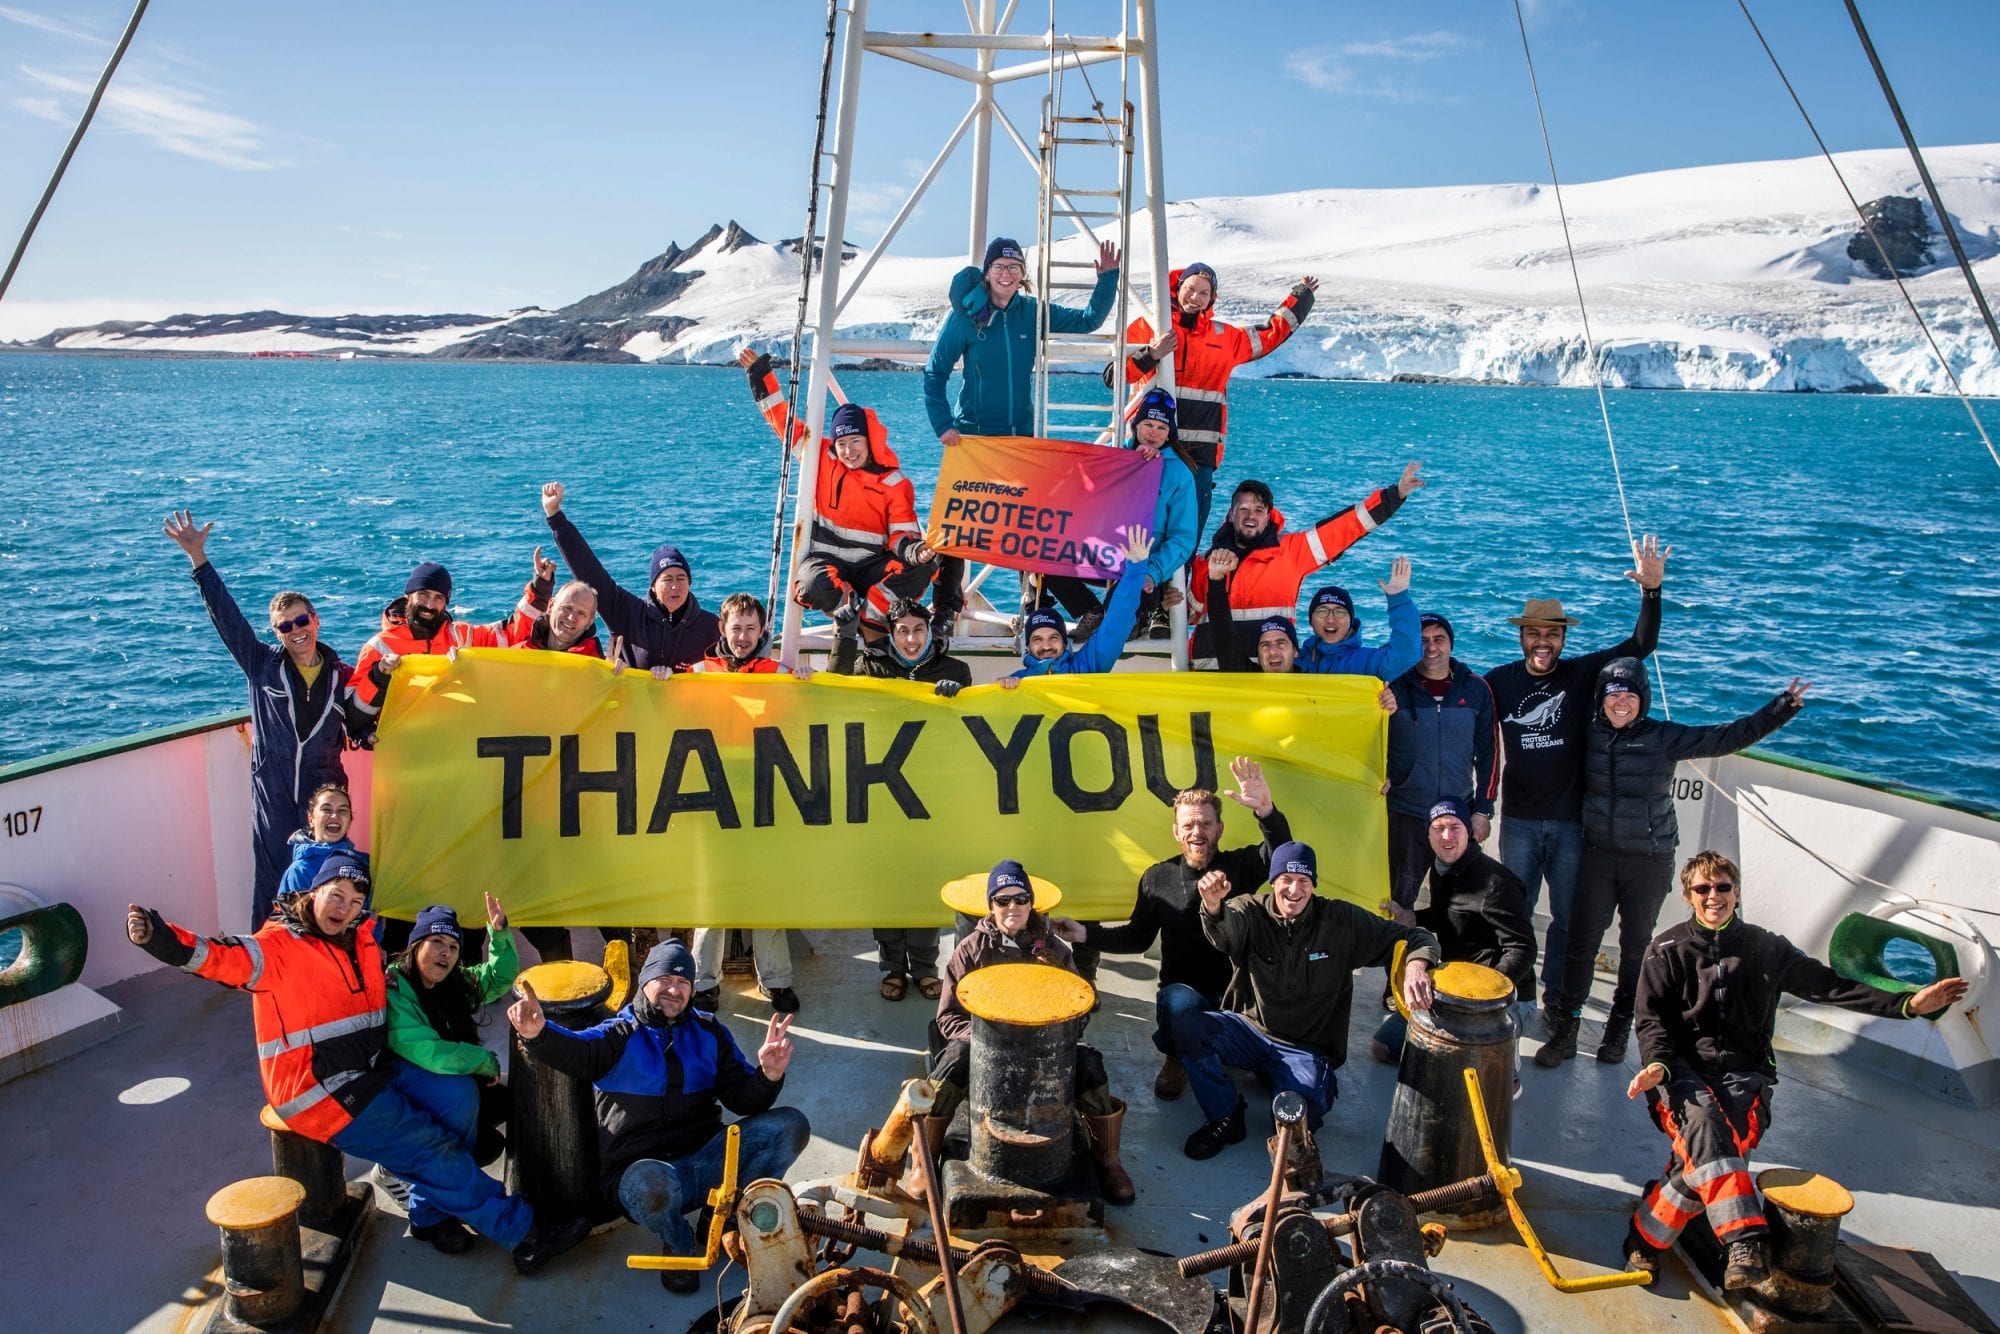 Large group on board the deck of a ship in a snowy environment wave to the camera and hold up a banner reading 'Thank you!'